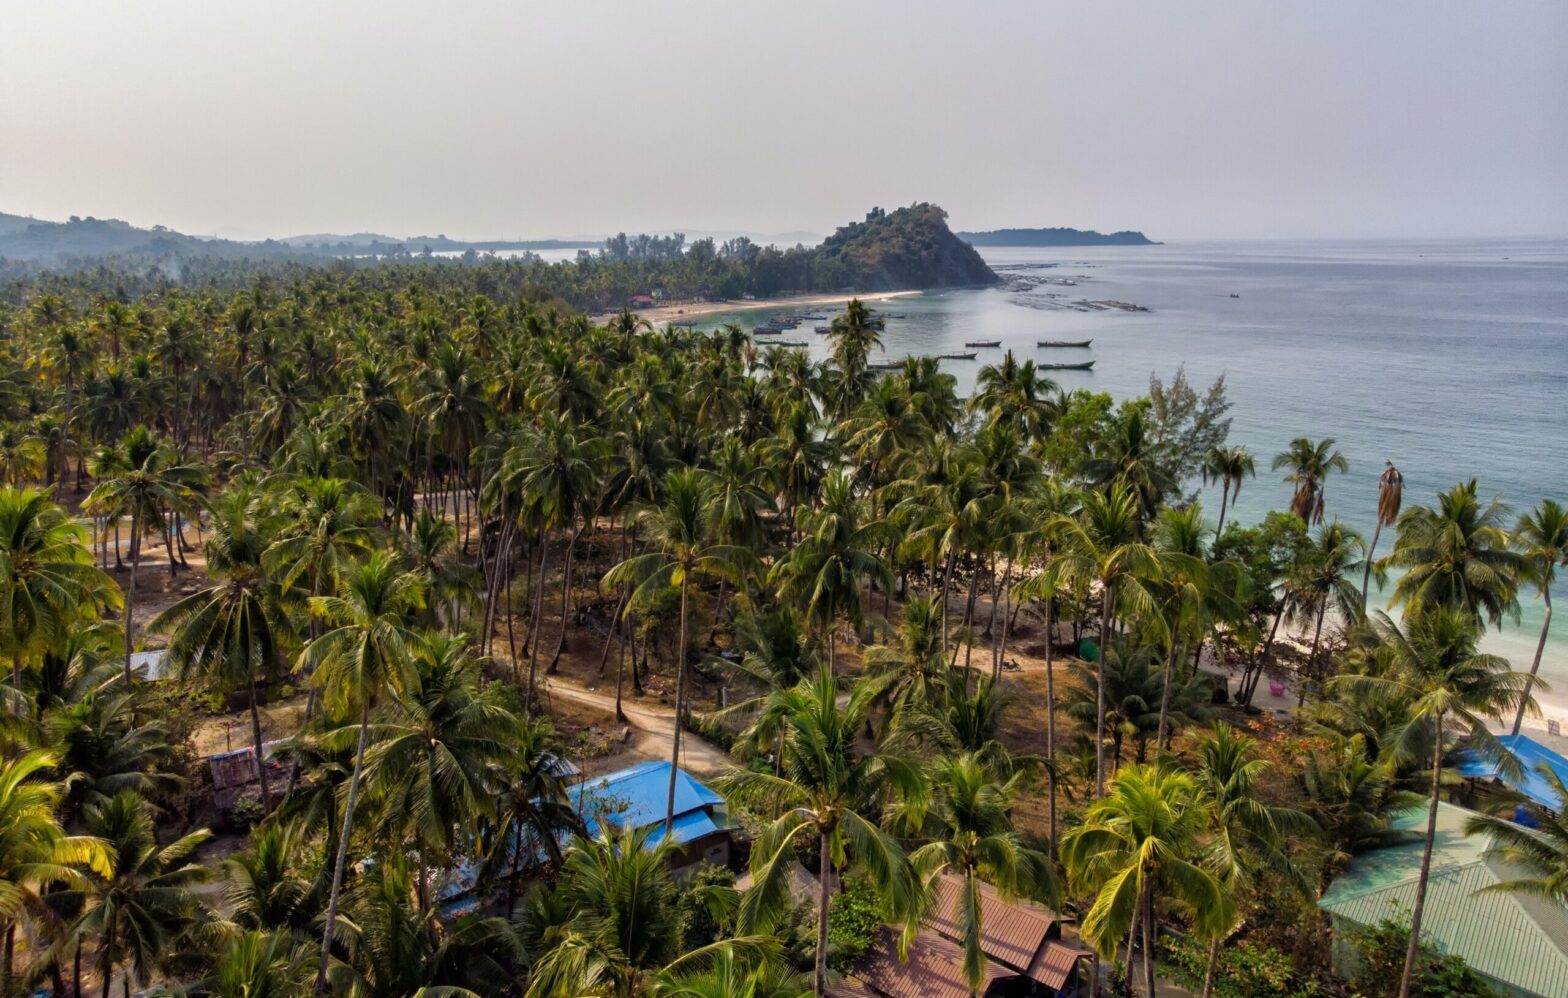 A Guide To Myanmar's Top Beaches